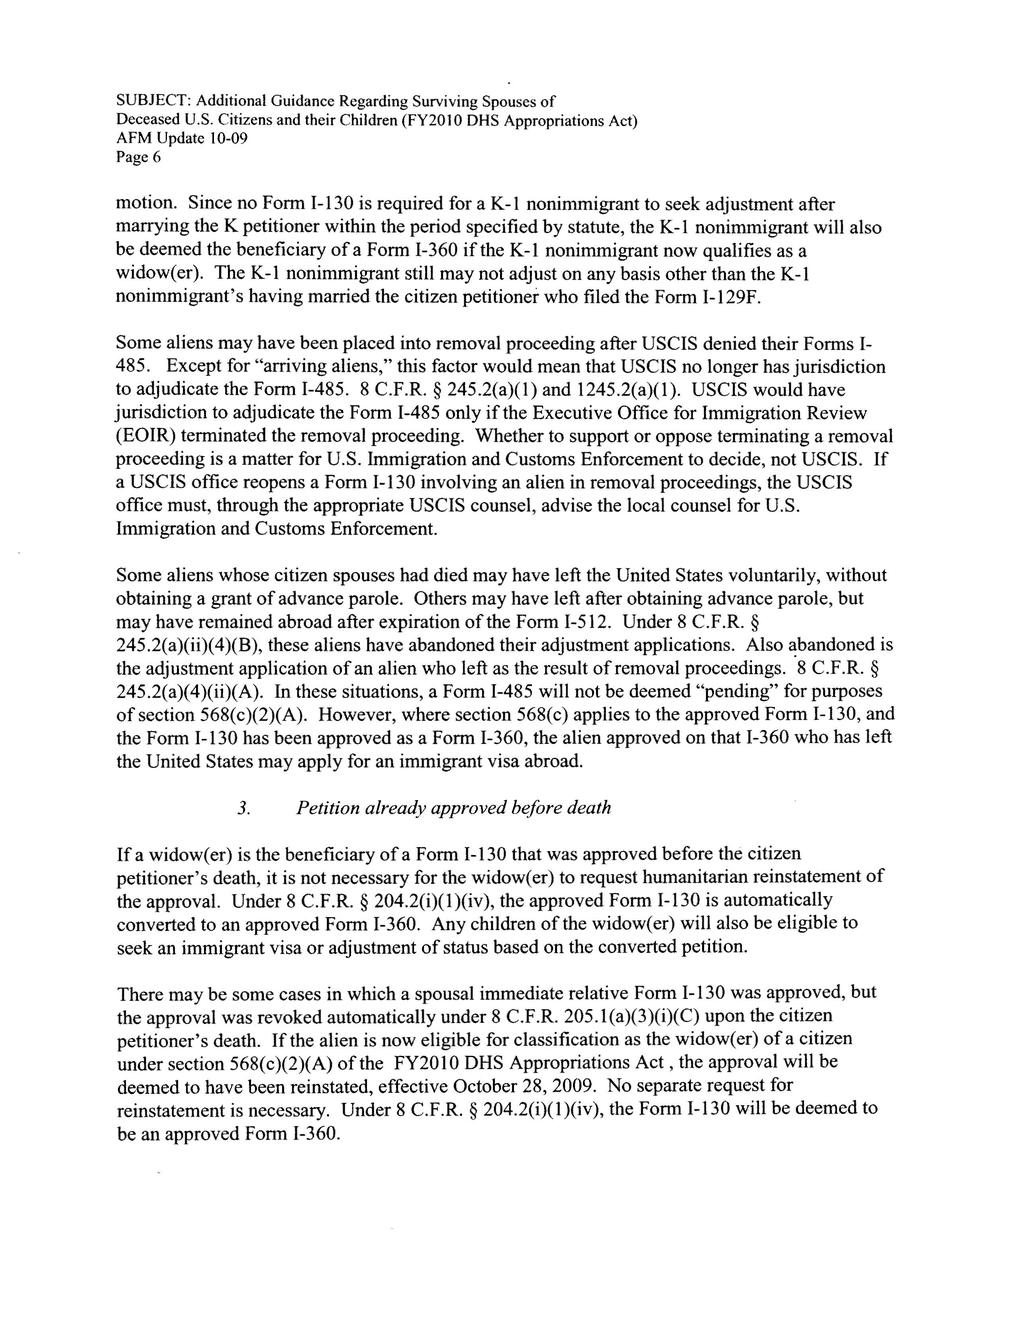 SUBJECT: Additional Guidance Regarding Surviving Spouses of Deceased U.S. Citizens and their Children (FY201 0 DHS Appropriations Act) AFM Update 10-09 Page 6 motion.